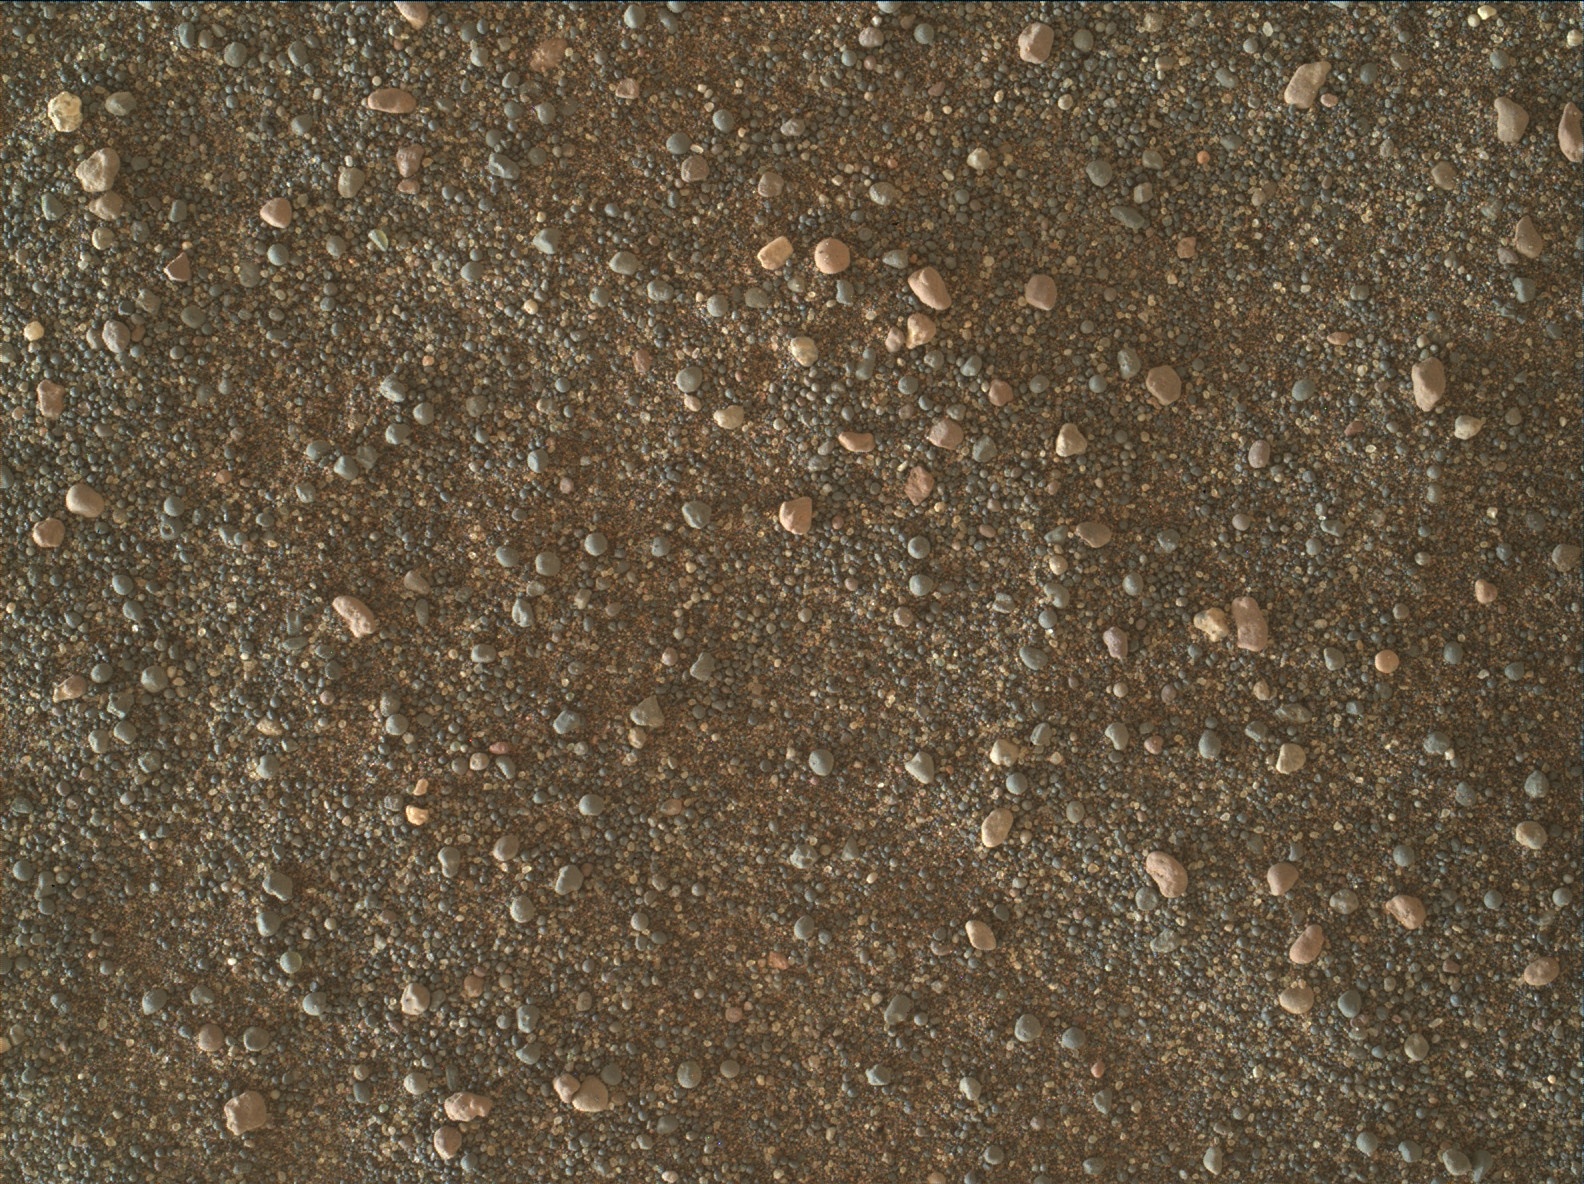 Nasa's Mars rover Curiosity acquired this image using its Mars Hand Lens Imager (MAHLI) on Sol 2991